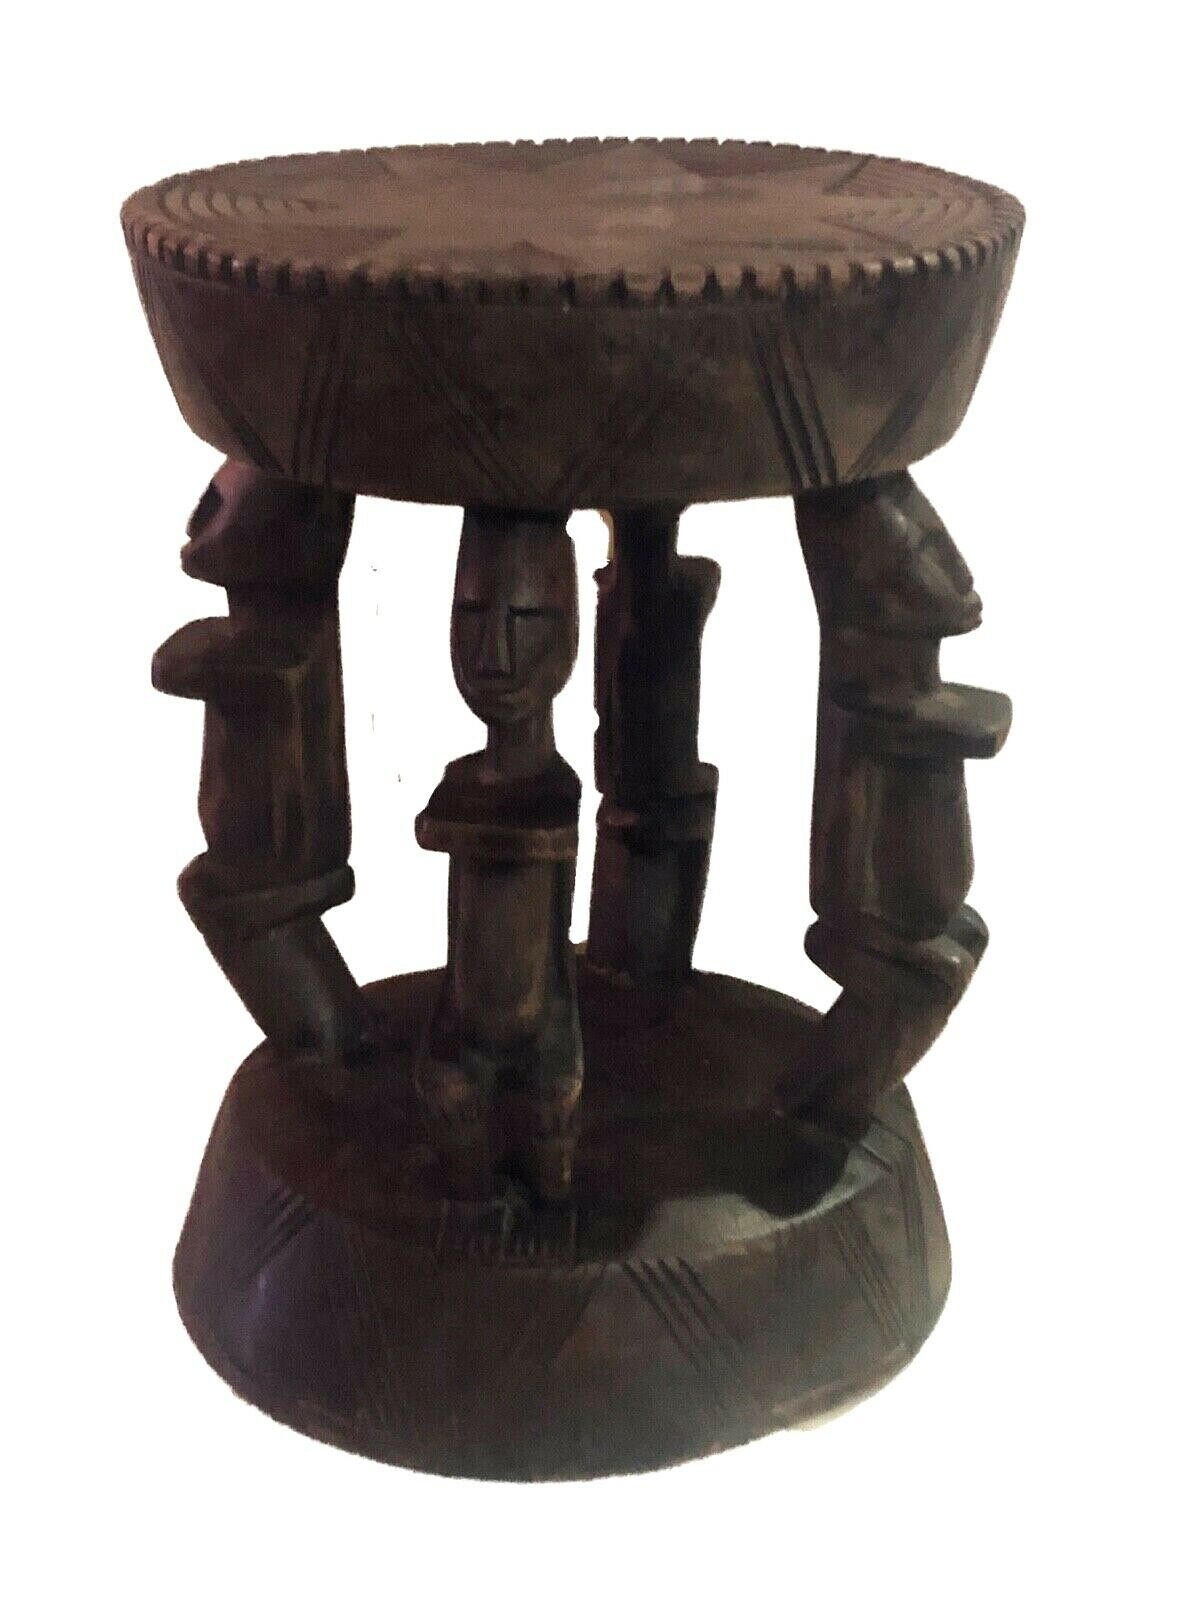 #652 African Dogon  Carved Wood Milk Stool Mali 12" H by 9.25" D